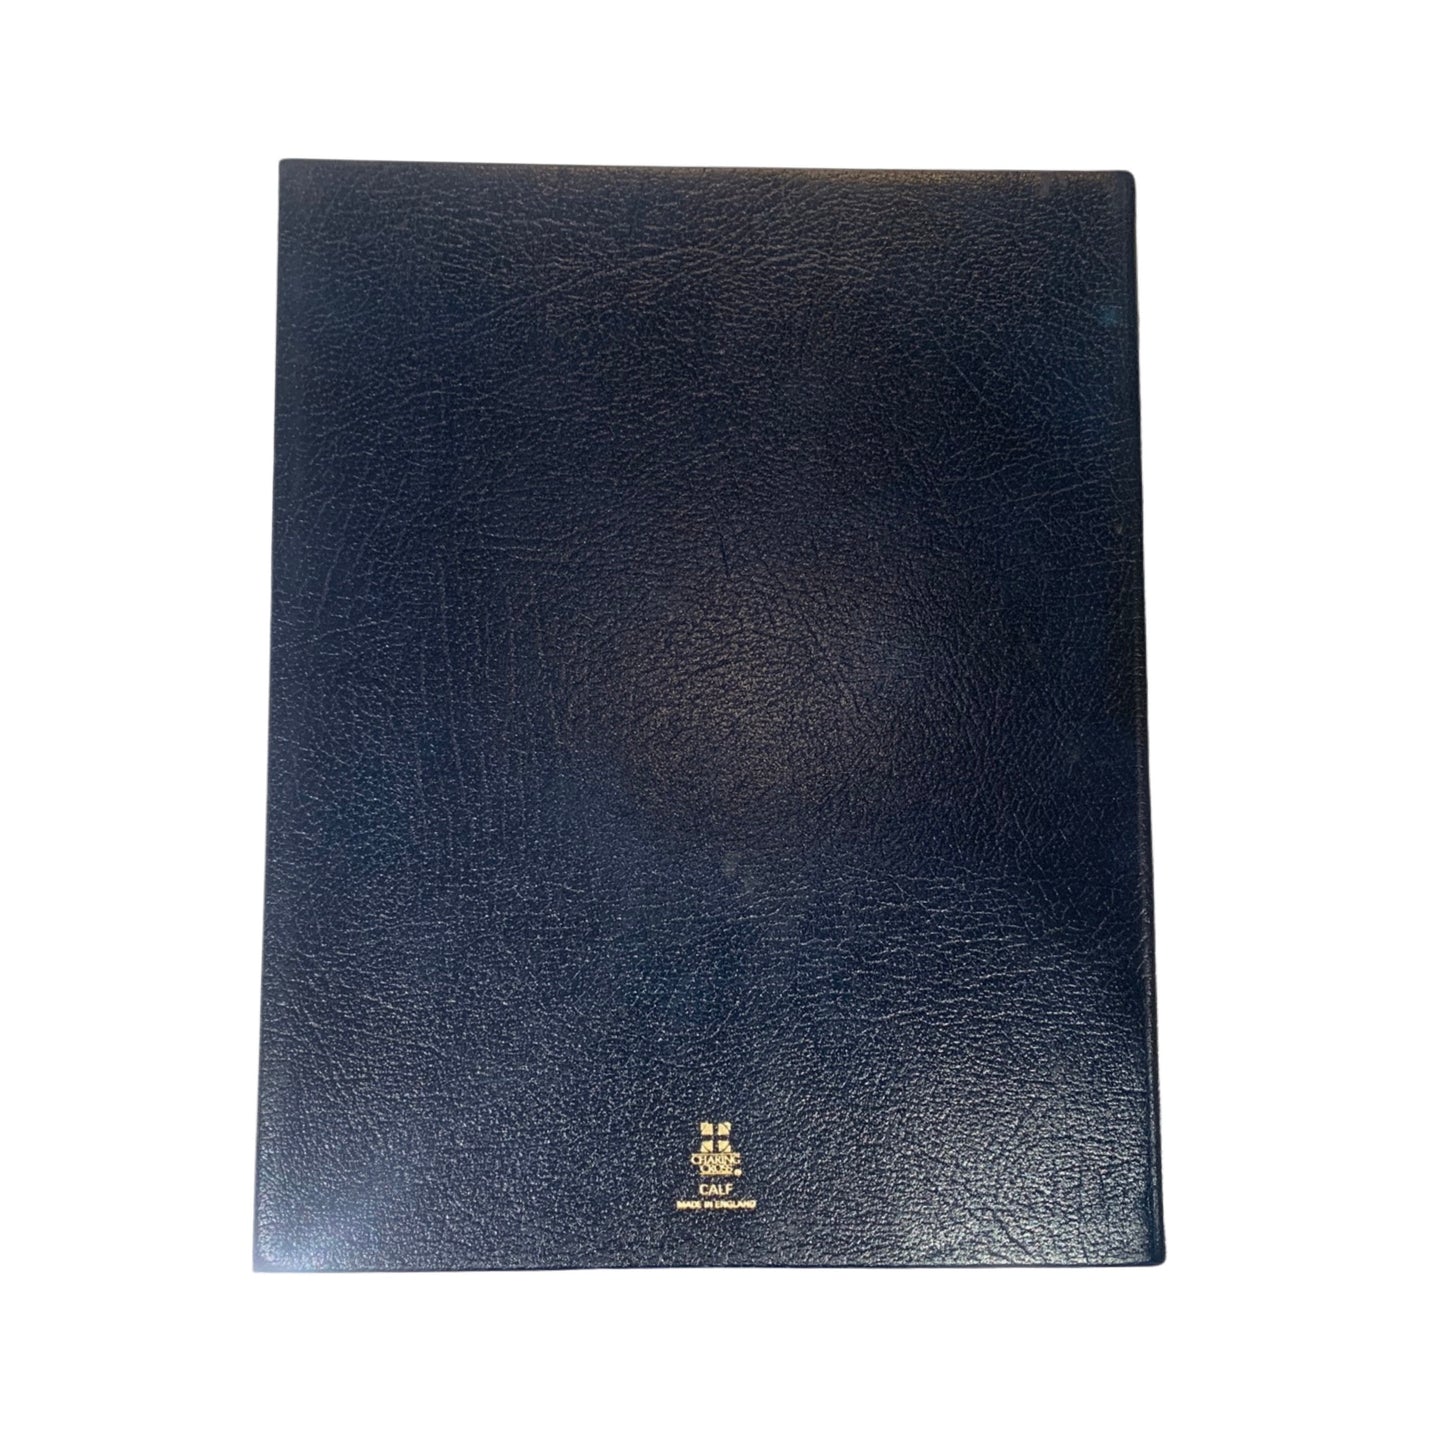 Leather Notebook | 8 by 10 inches | Buffalo Calf Embossed with Gold | Blank Pages | made in England